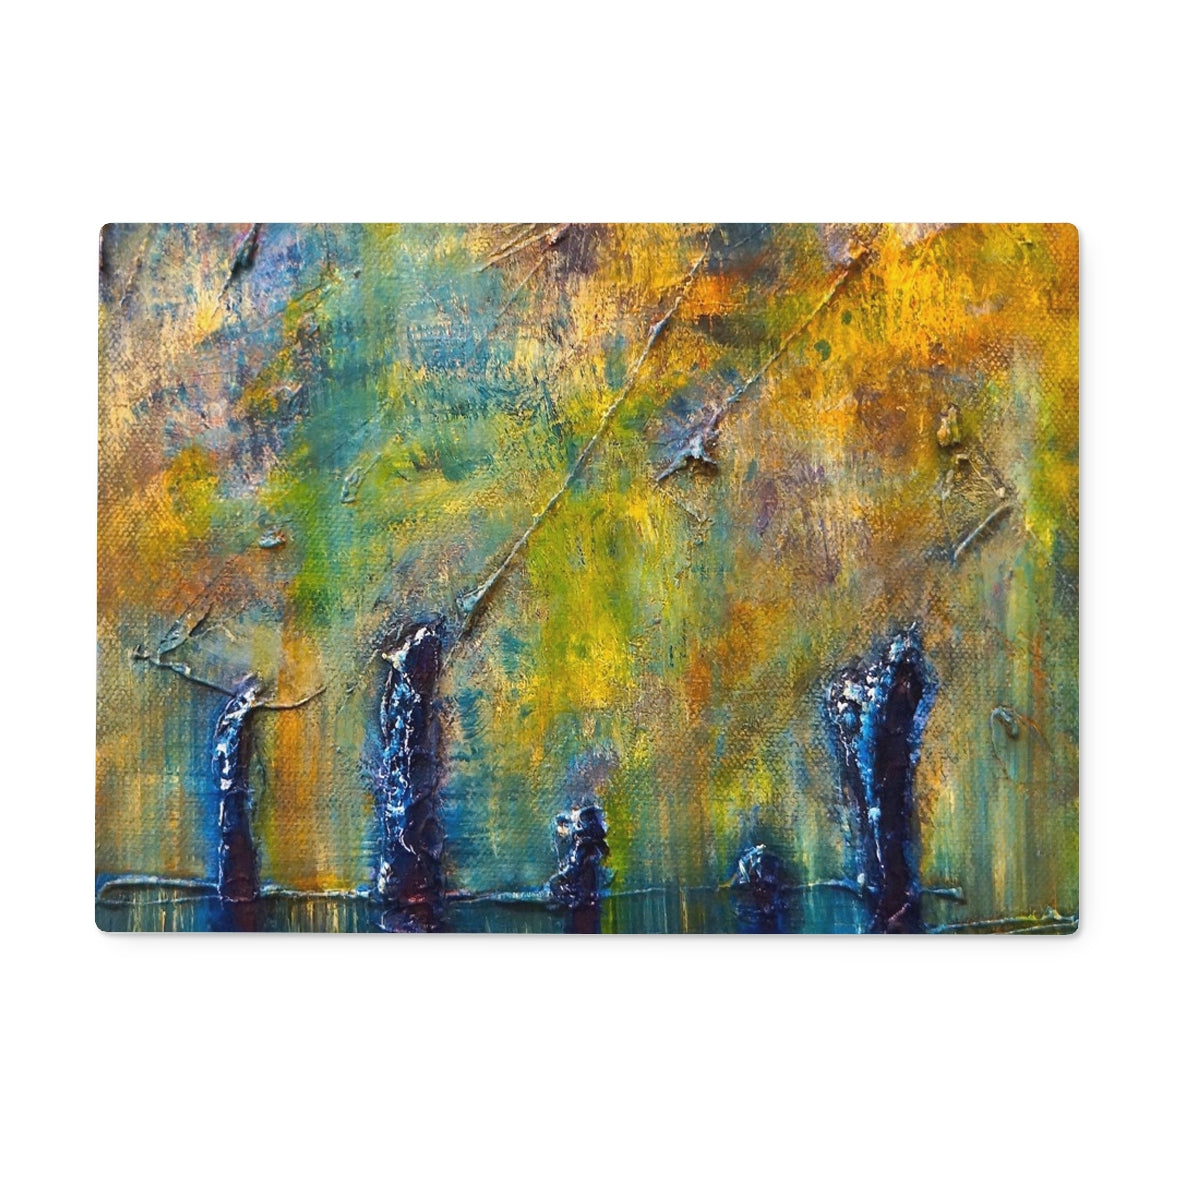 Stenness Moonlight Orkney Art Gifts Glass Chopping Board-Glass Chopping Boards-Orkney Art Gallery-15"x11" Rectangular-Paintings, Prints, Homeware, Art Gifts From Scotland By Scottish Artist Kevin Hunter